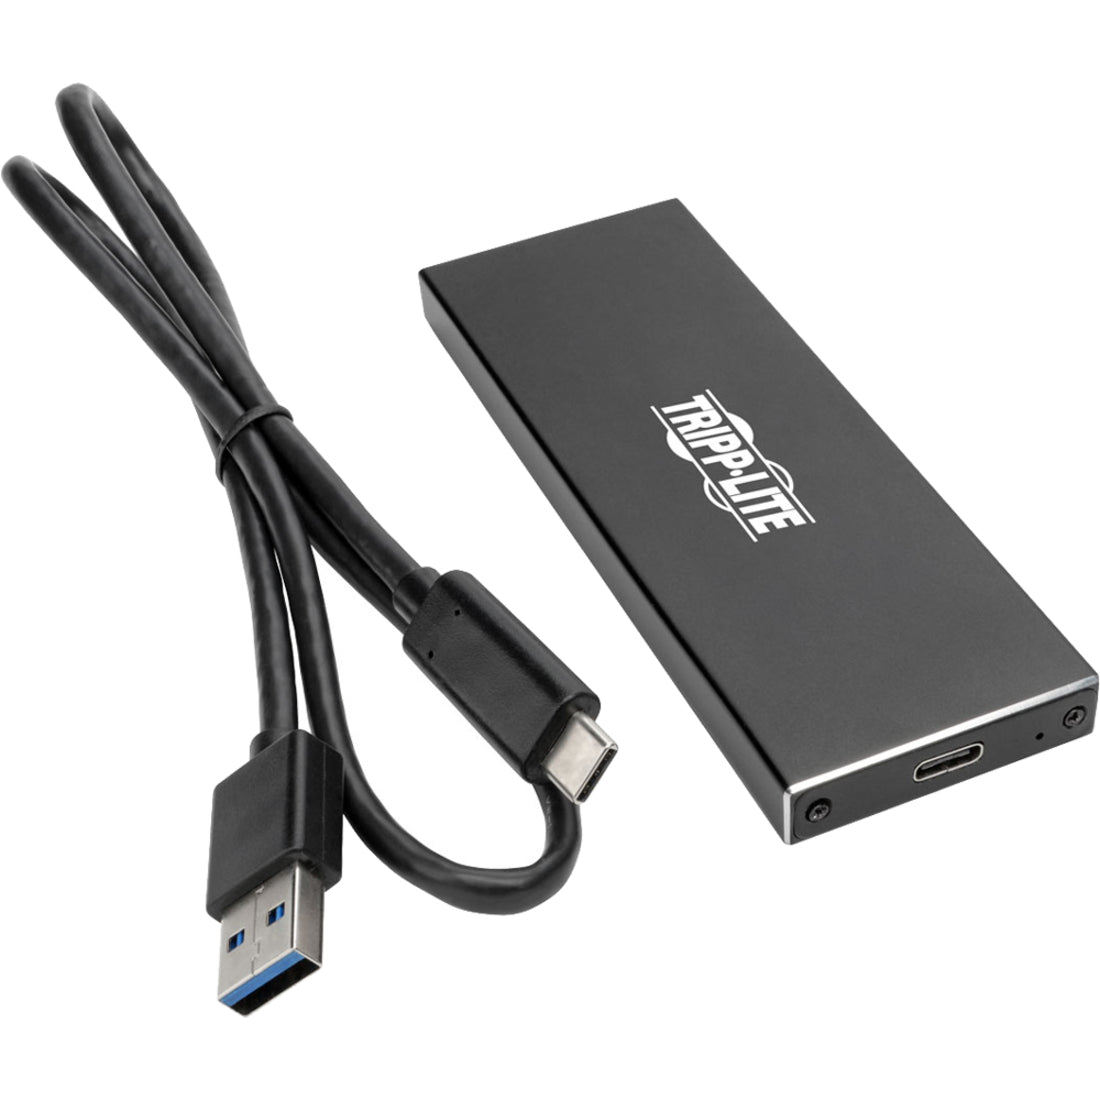 Tripp Lite USB 3.1 Gen 2 (10 Gbps) USB-C to M.2 NGFF SATA SSD (B-Key) Enclosure Adapter with UASP Support Thunderbolt 3 Compatible